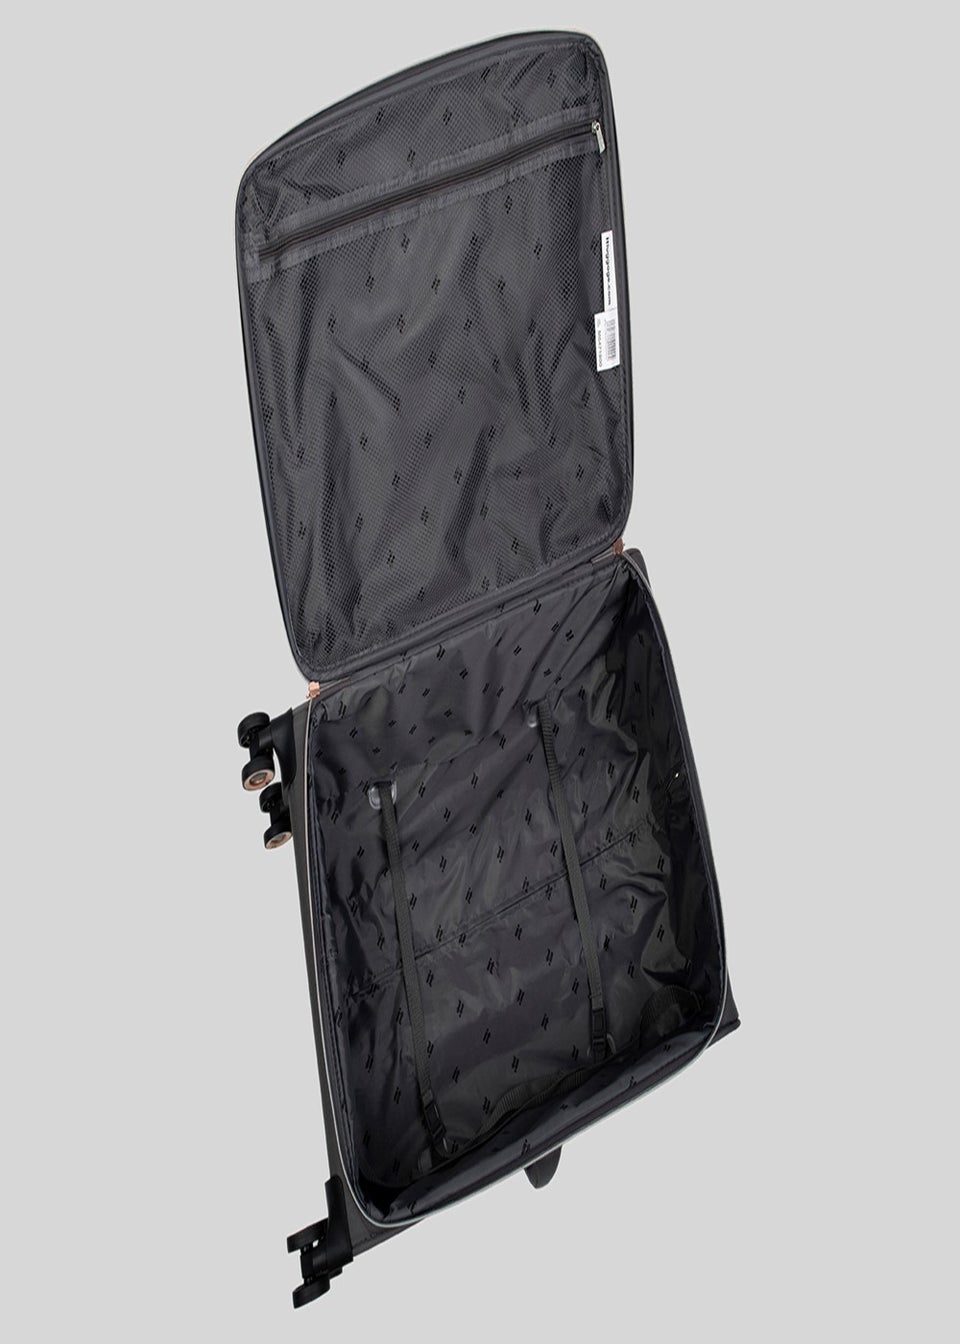 IT Luggage Enliven Charcoal Suitcase